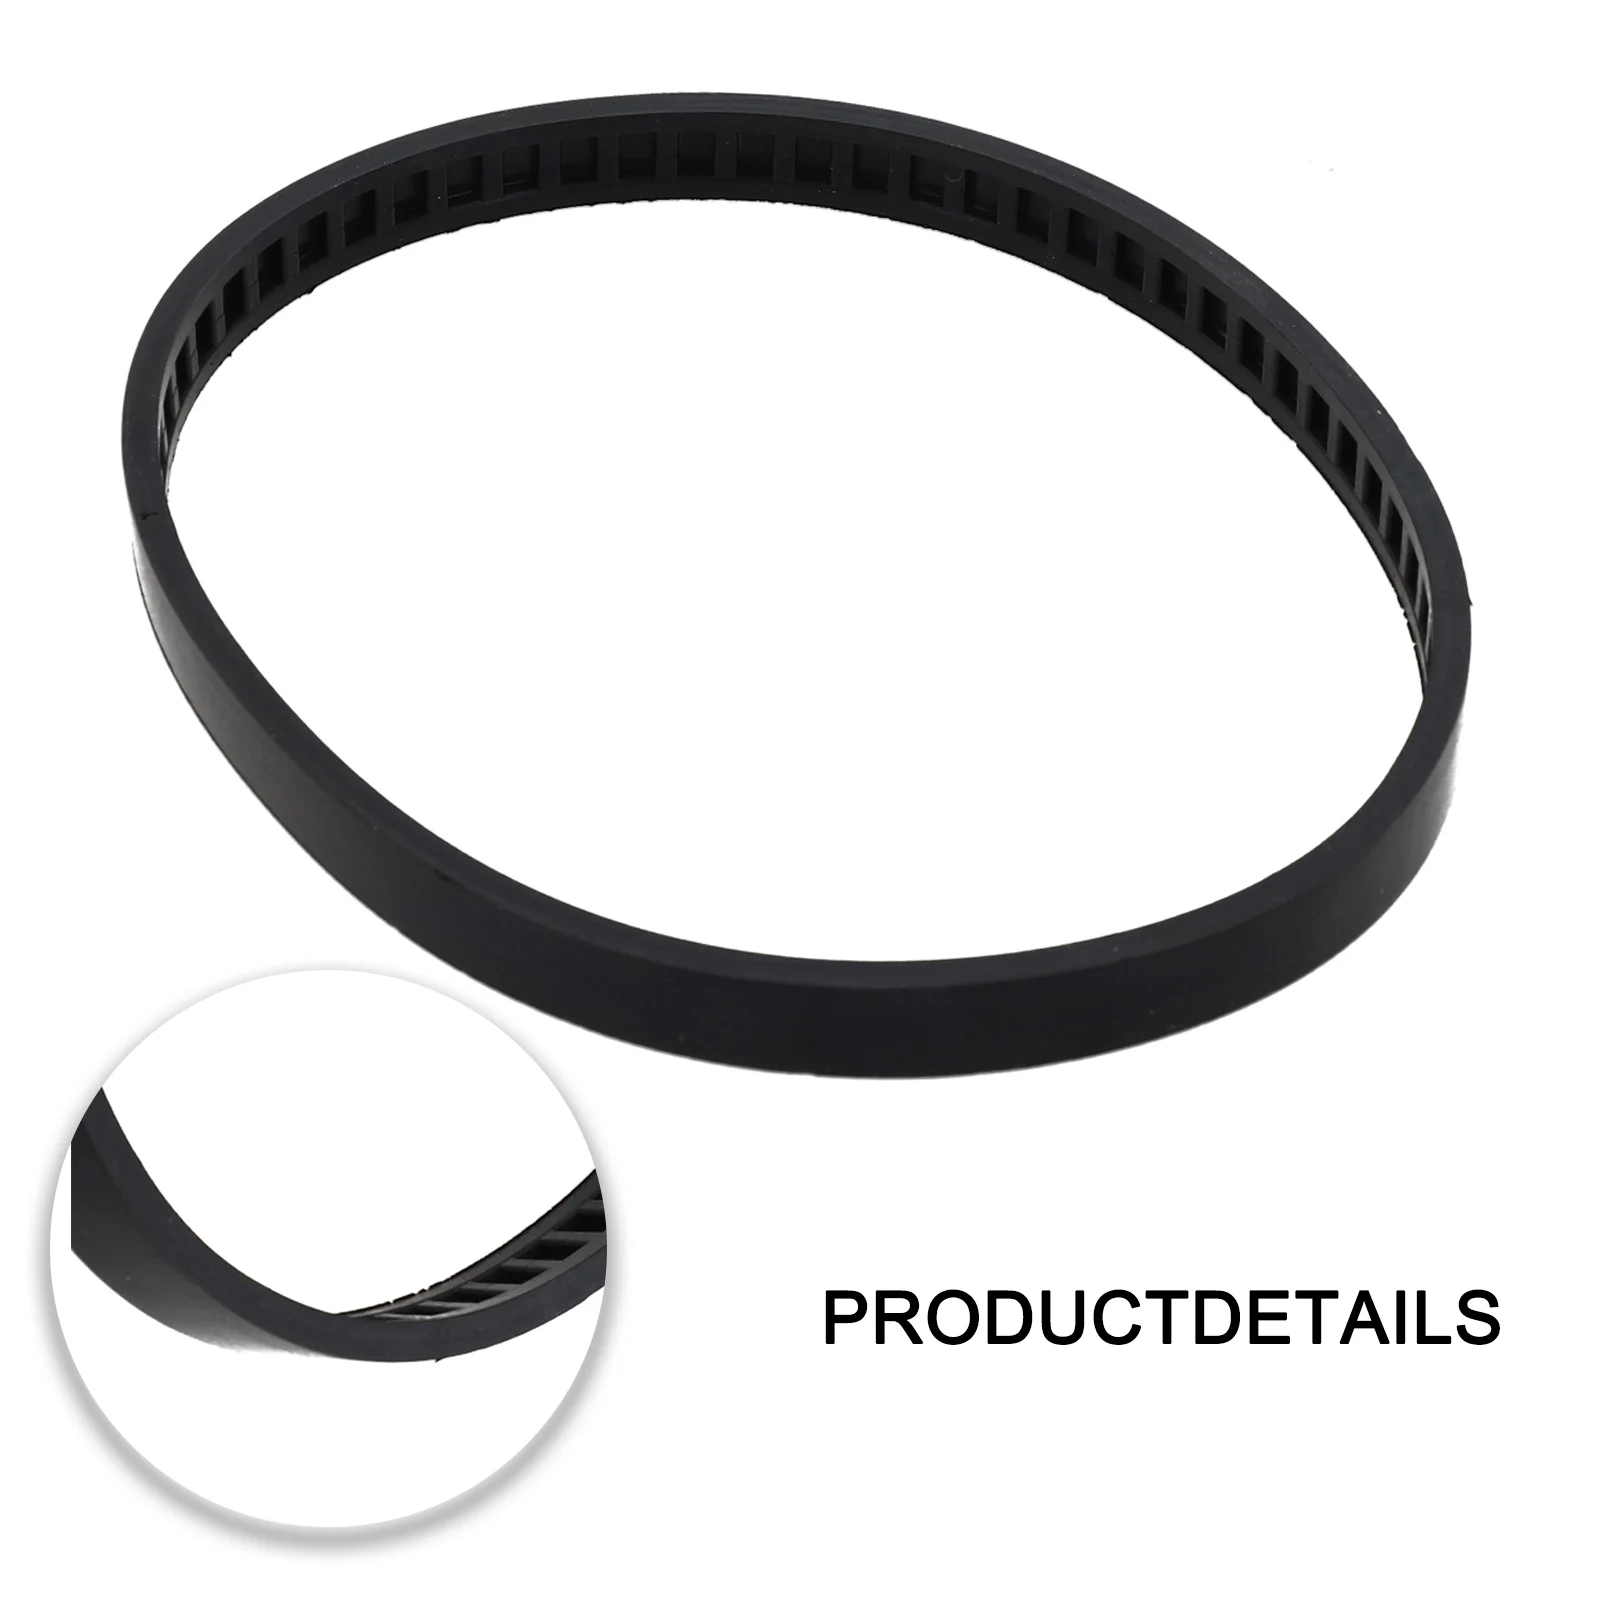 45-69-0010 Blade Pulley Tire For Milwaukee Bandsaw Part Deep Cutting Blades Balck Elastic Rubber Belt For Bandsaw Blade